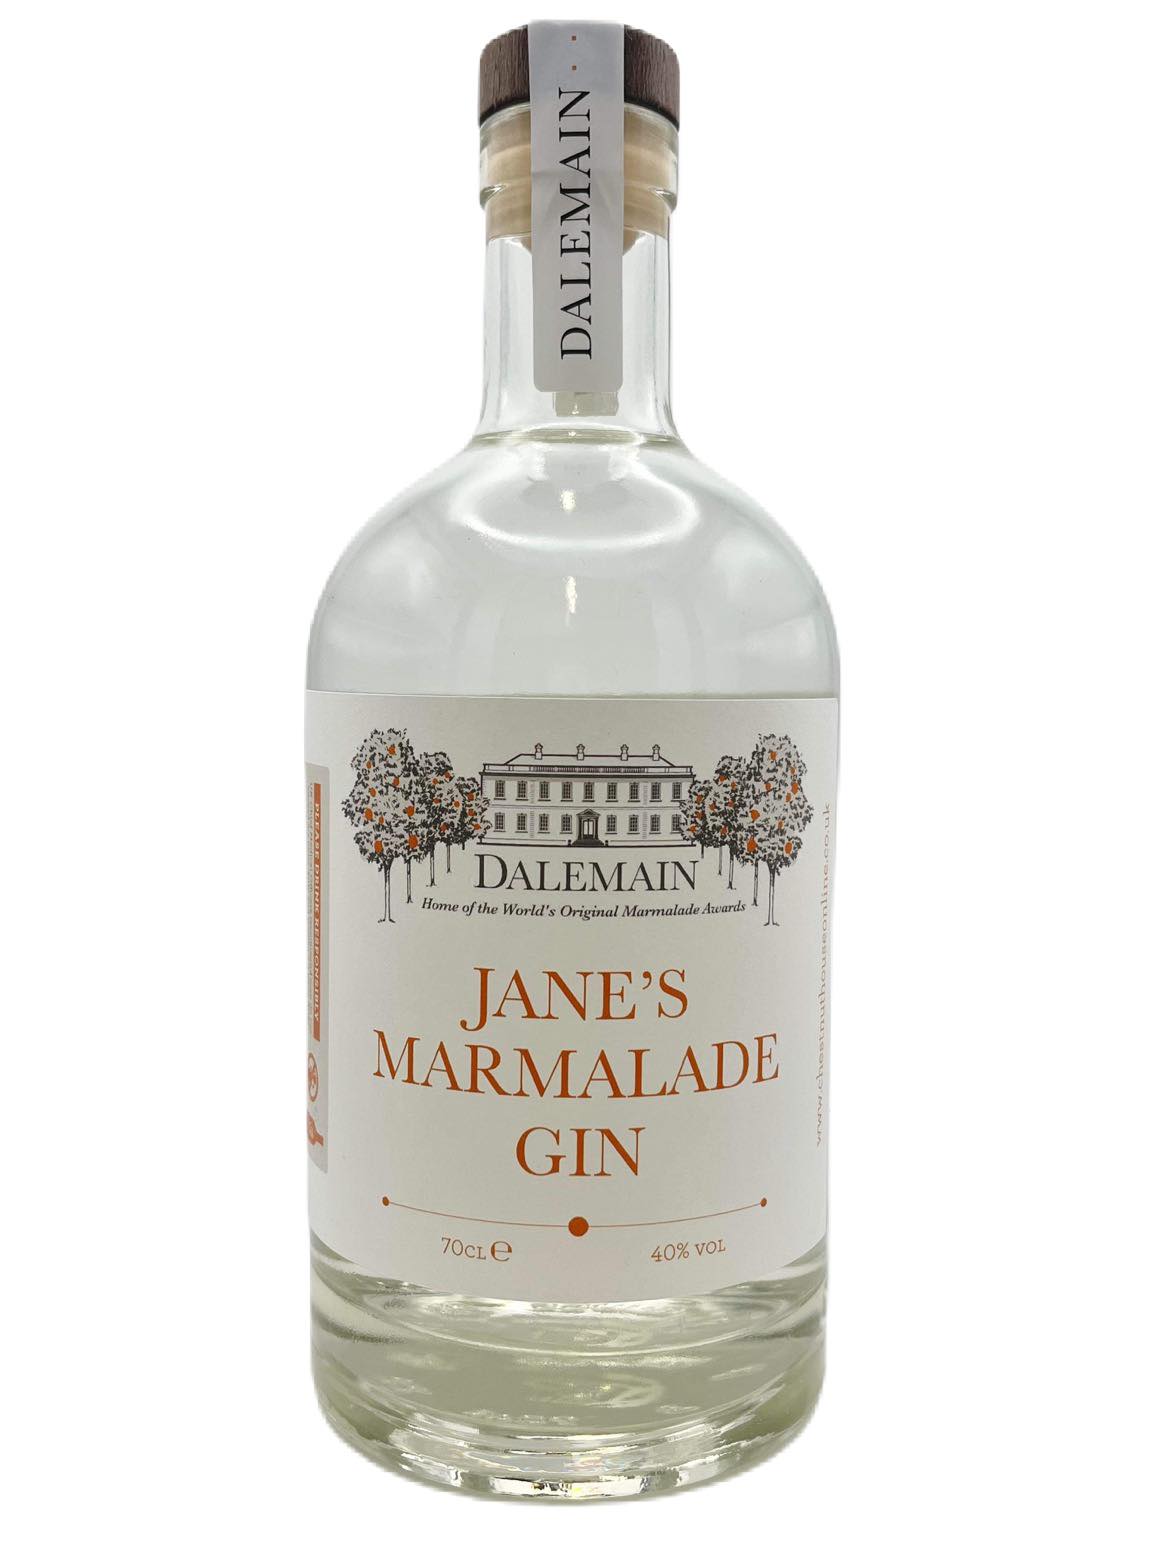 A clear glass bottle of Dalemain Jane's Marmalade Gin. The bottle's label features a manor house lined with orange trees.